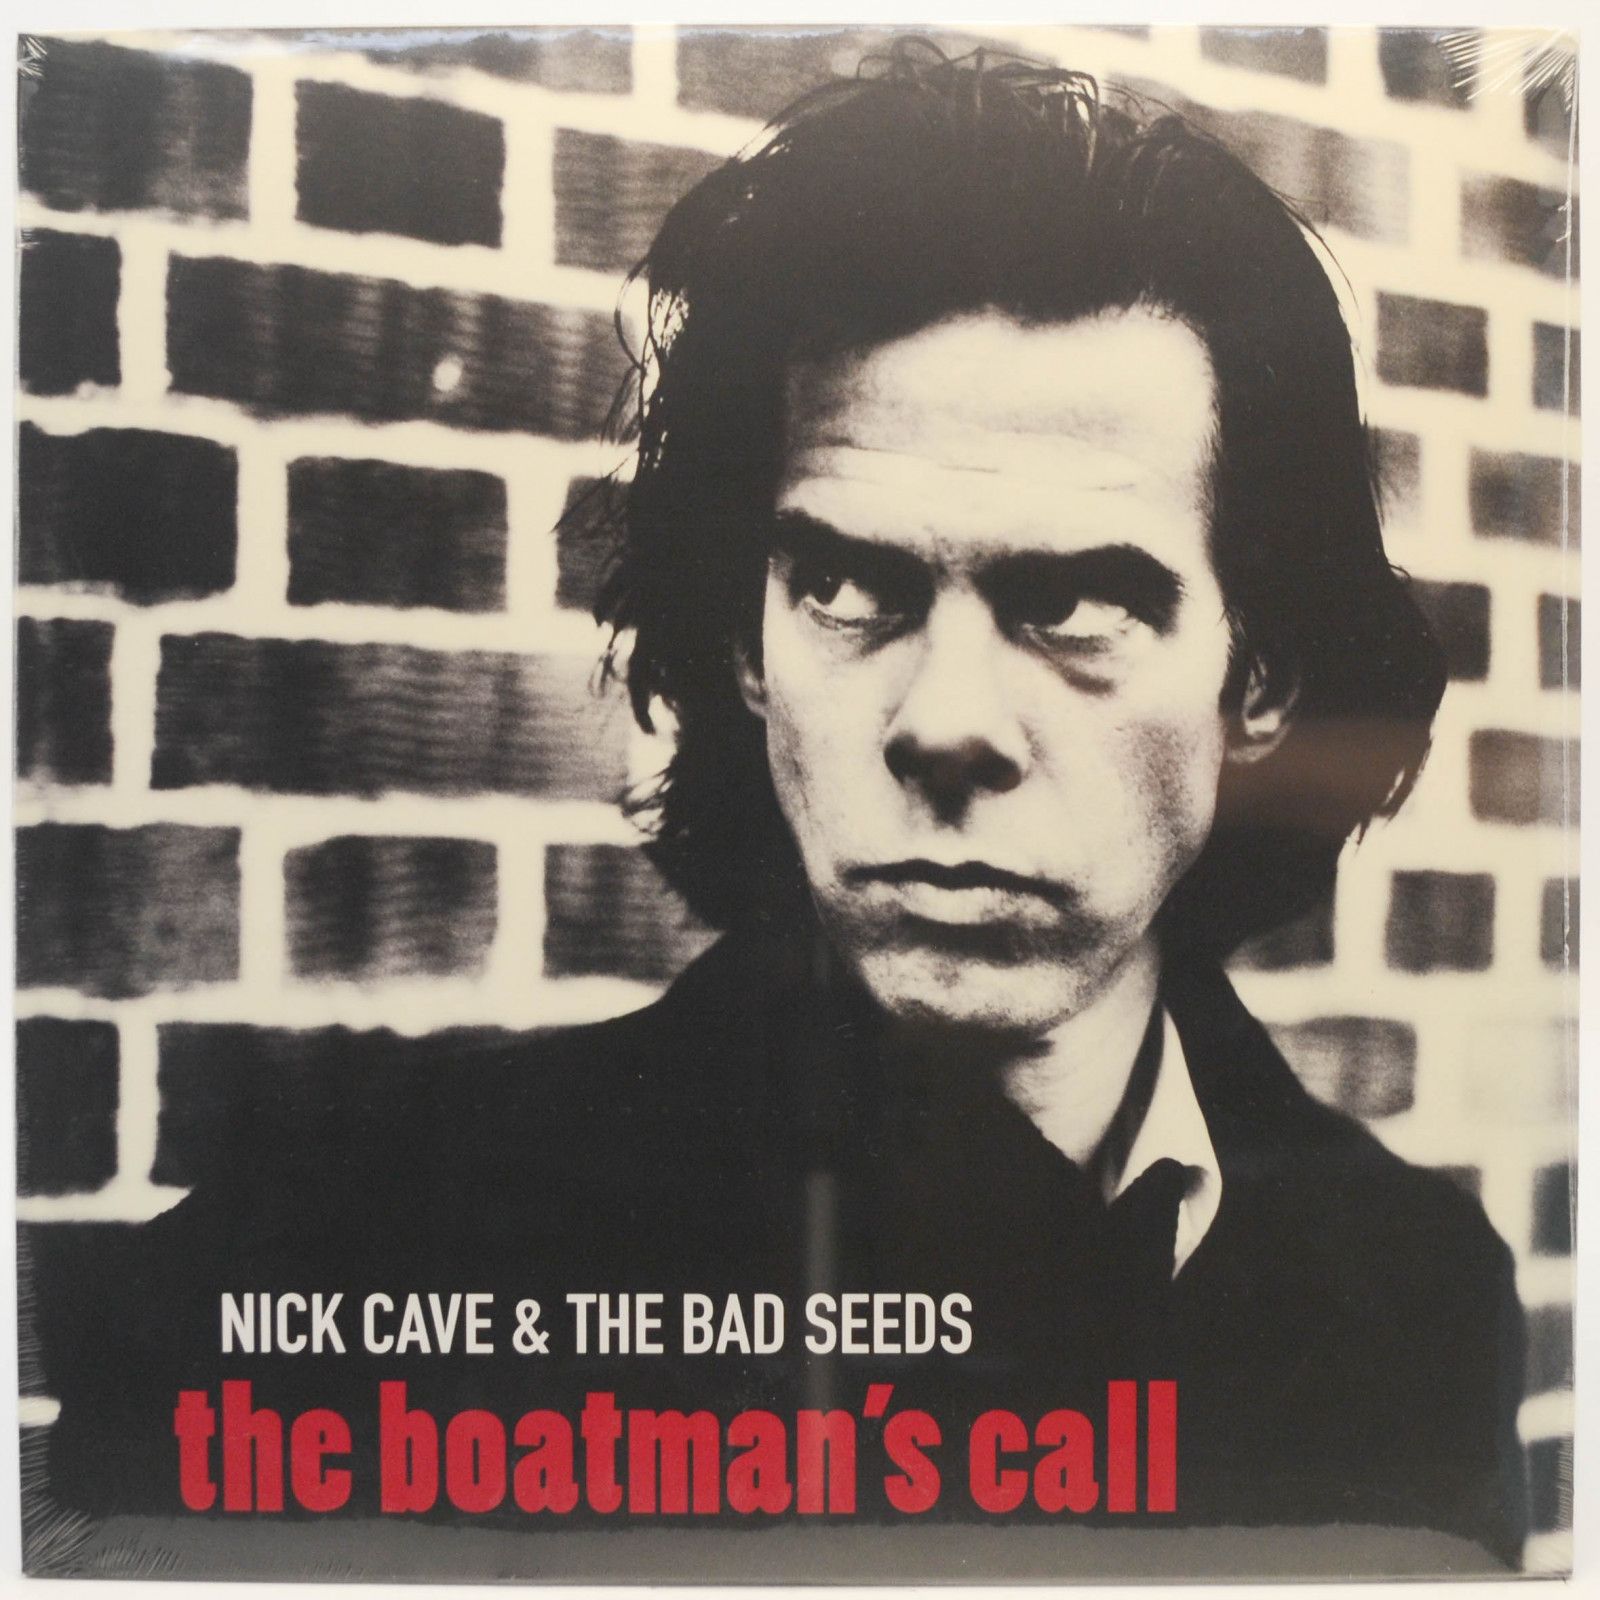 Nick Cave & The Bad Seeds — The Boatman's Call, 1997